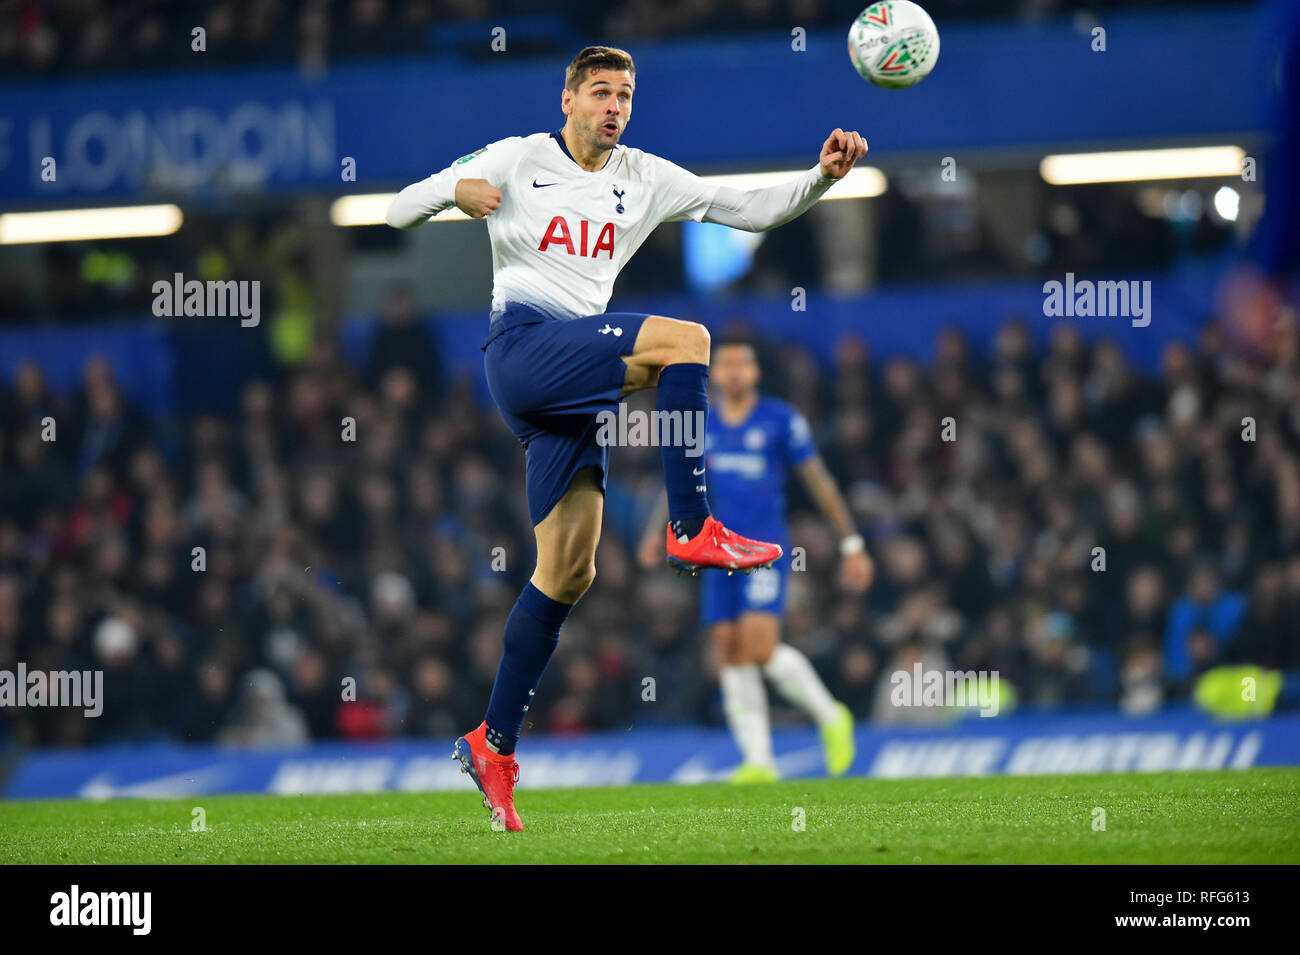 LONDON, UK 24 JANUARY  Tottenham forward Fernando Llorente in action during the Carabao Cup match between Chelsea and Tottenham Hotspur at Stamford Bridge, London on Thursday 24th January 2019. (Photo Credit: MI News & Sport) Stock Photo